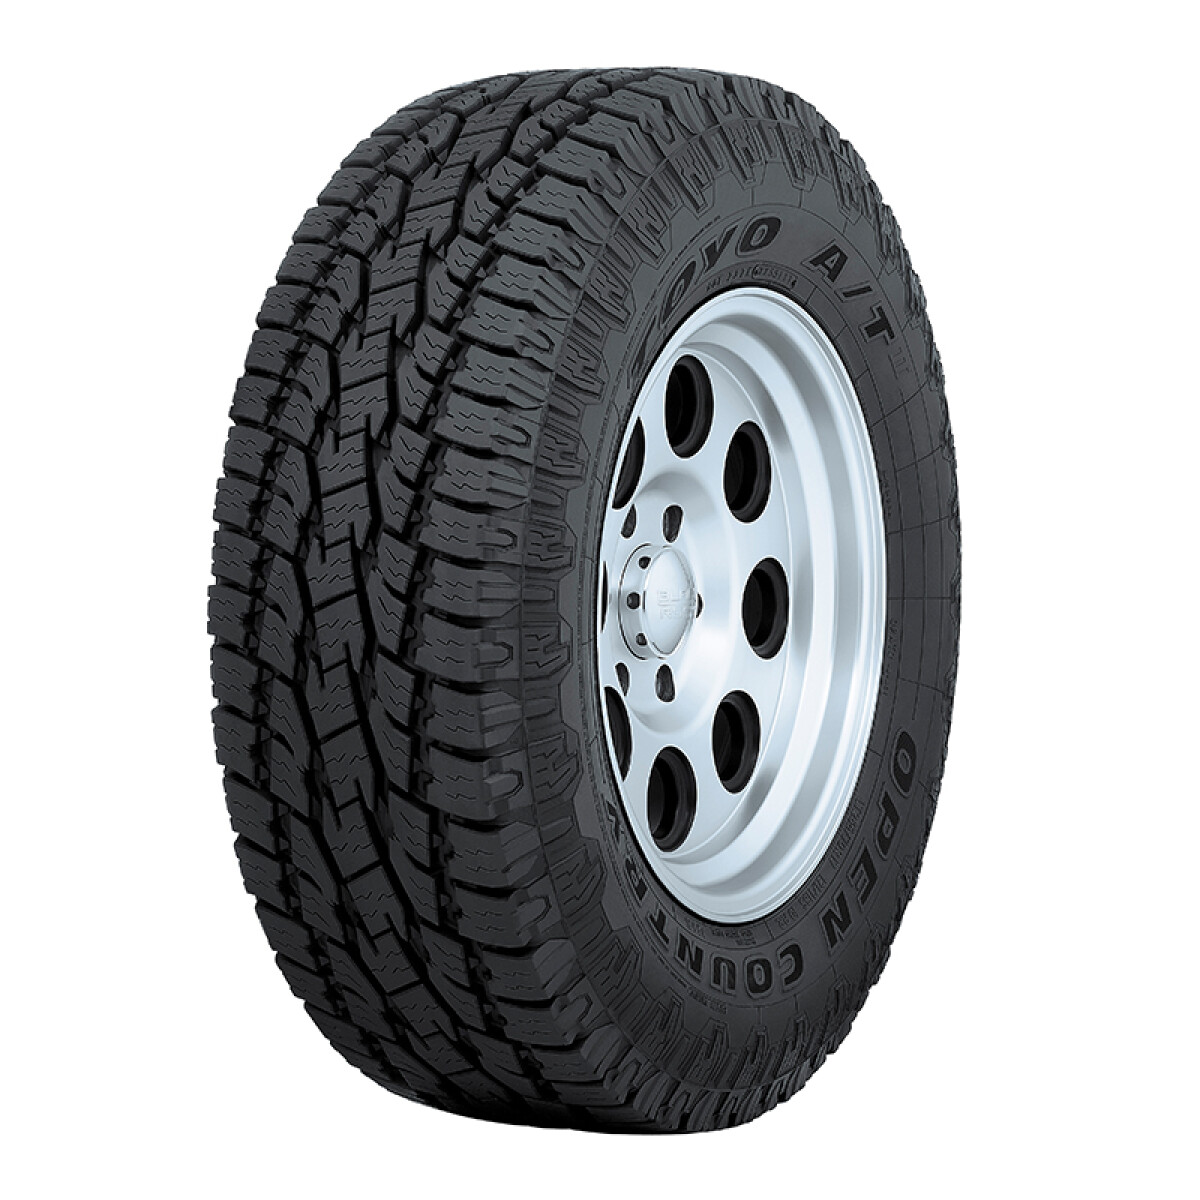 CUBIERTA NEUMATICO TOYO OPEN COUNTRY AT2 LT265/70R16 121/118R 